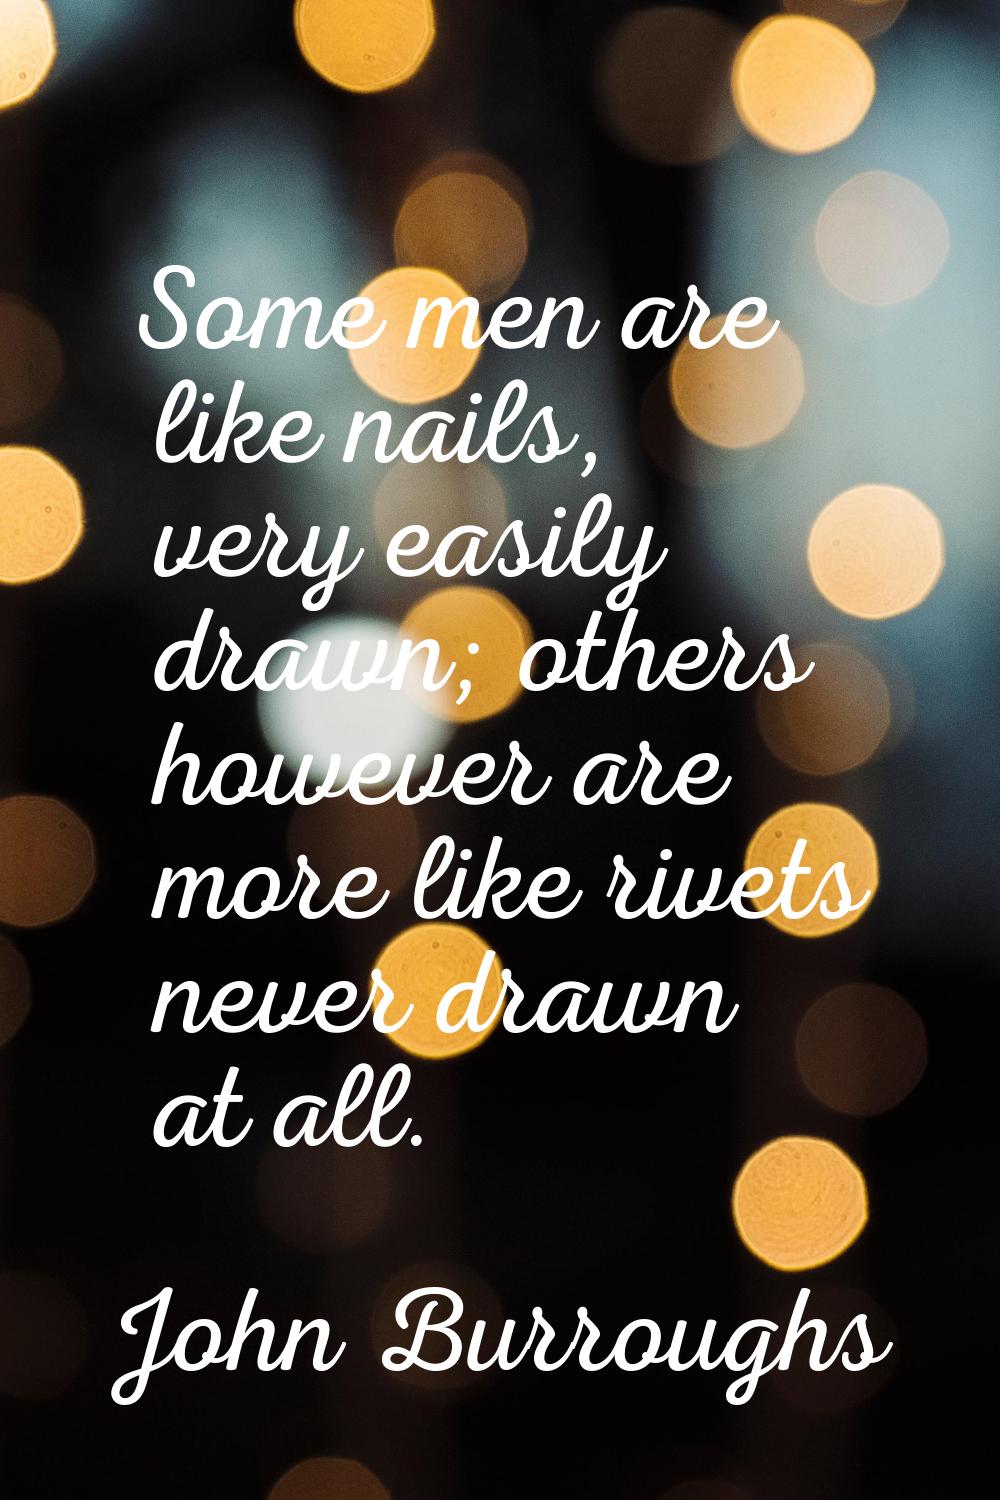 Some men are like nails, very easily drawn; others however are more like rivets never drawn at all.